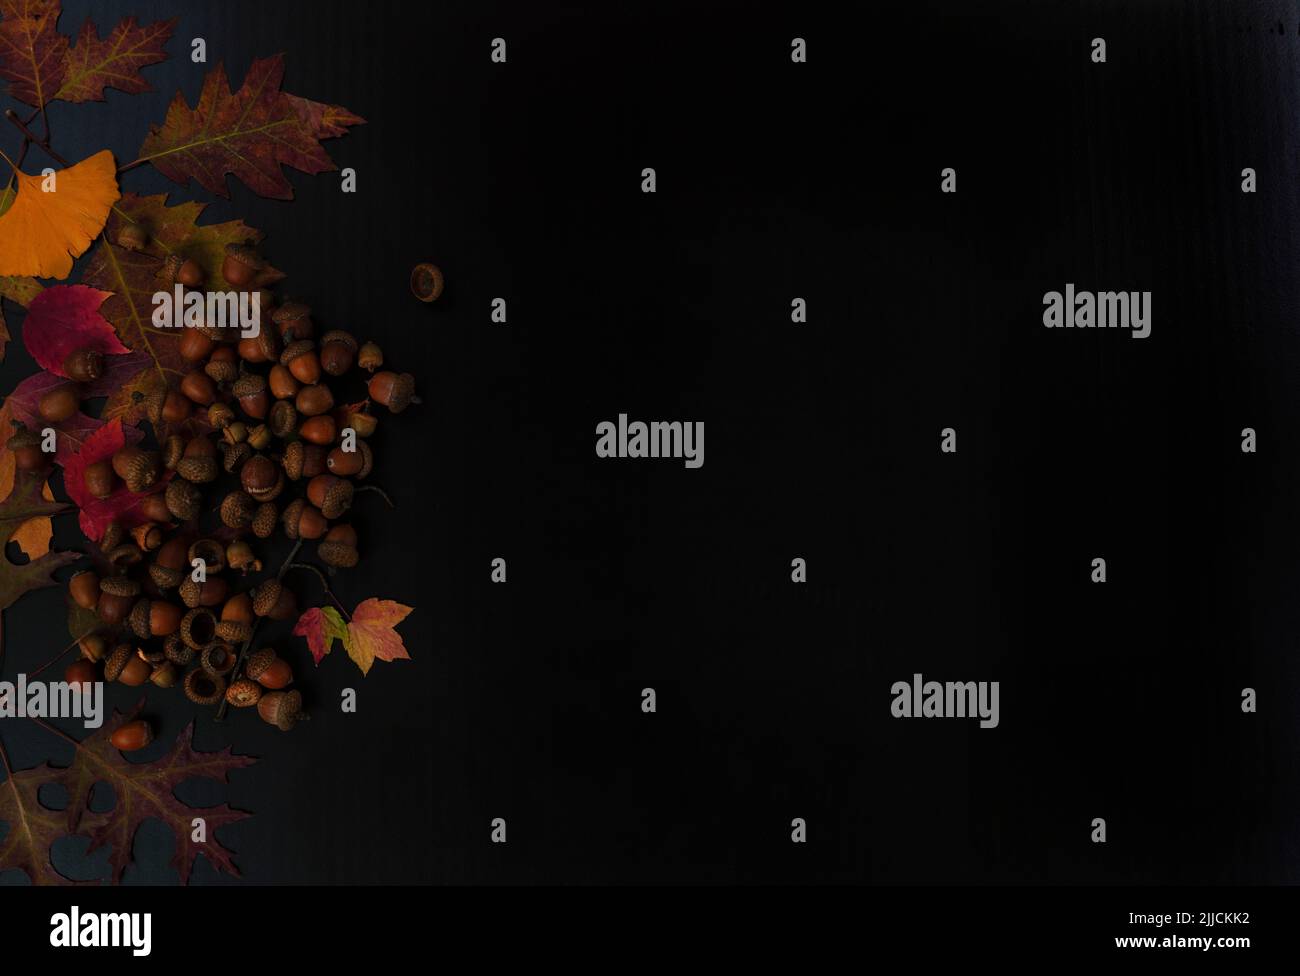 Thanksgiving or Halloween holiday background with autumn leaves and acorn decorations on dark stone setting Stock Photo